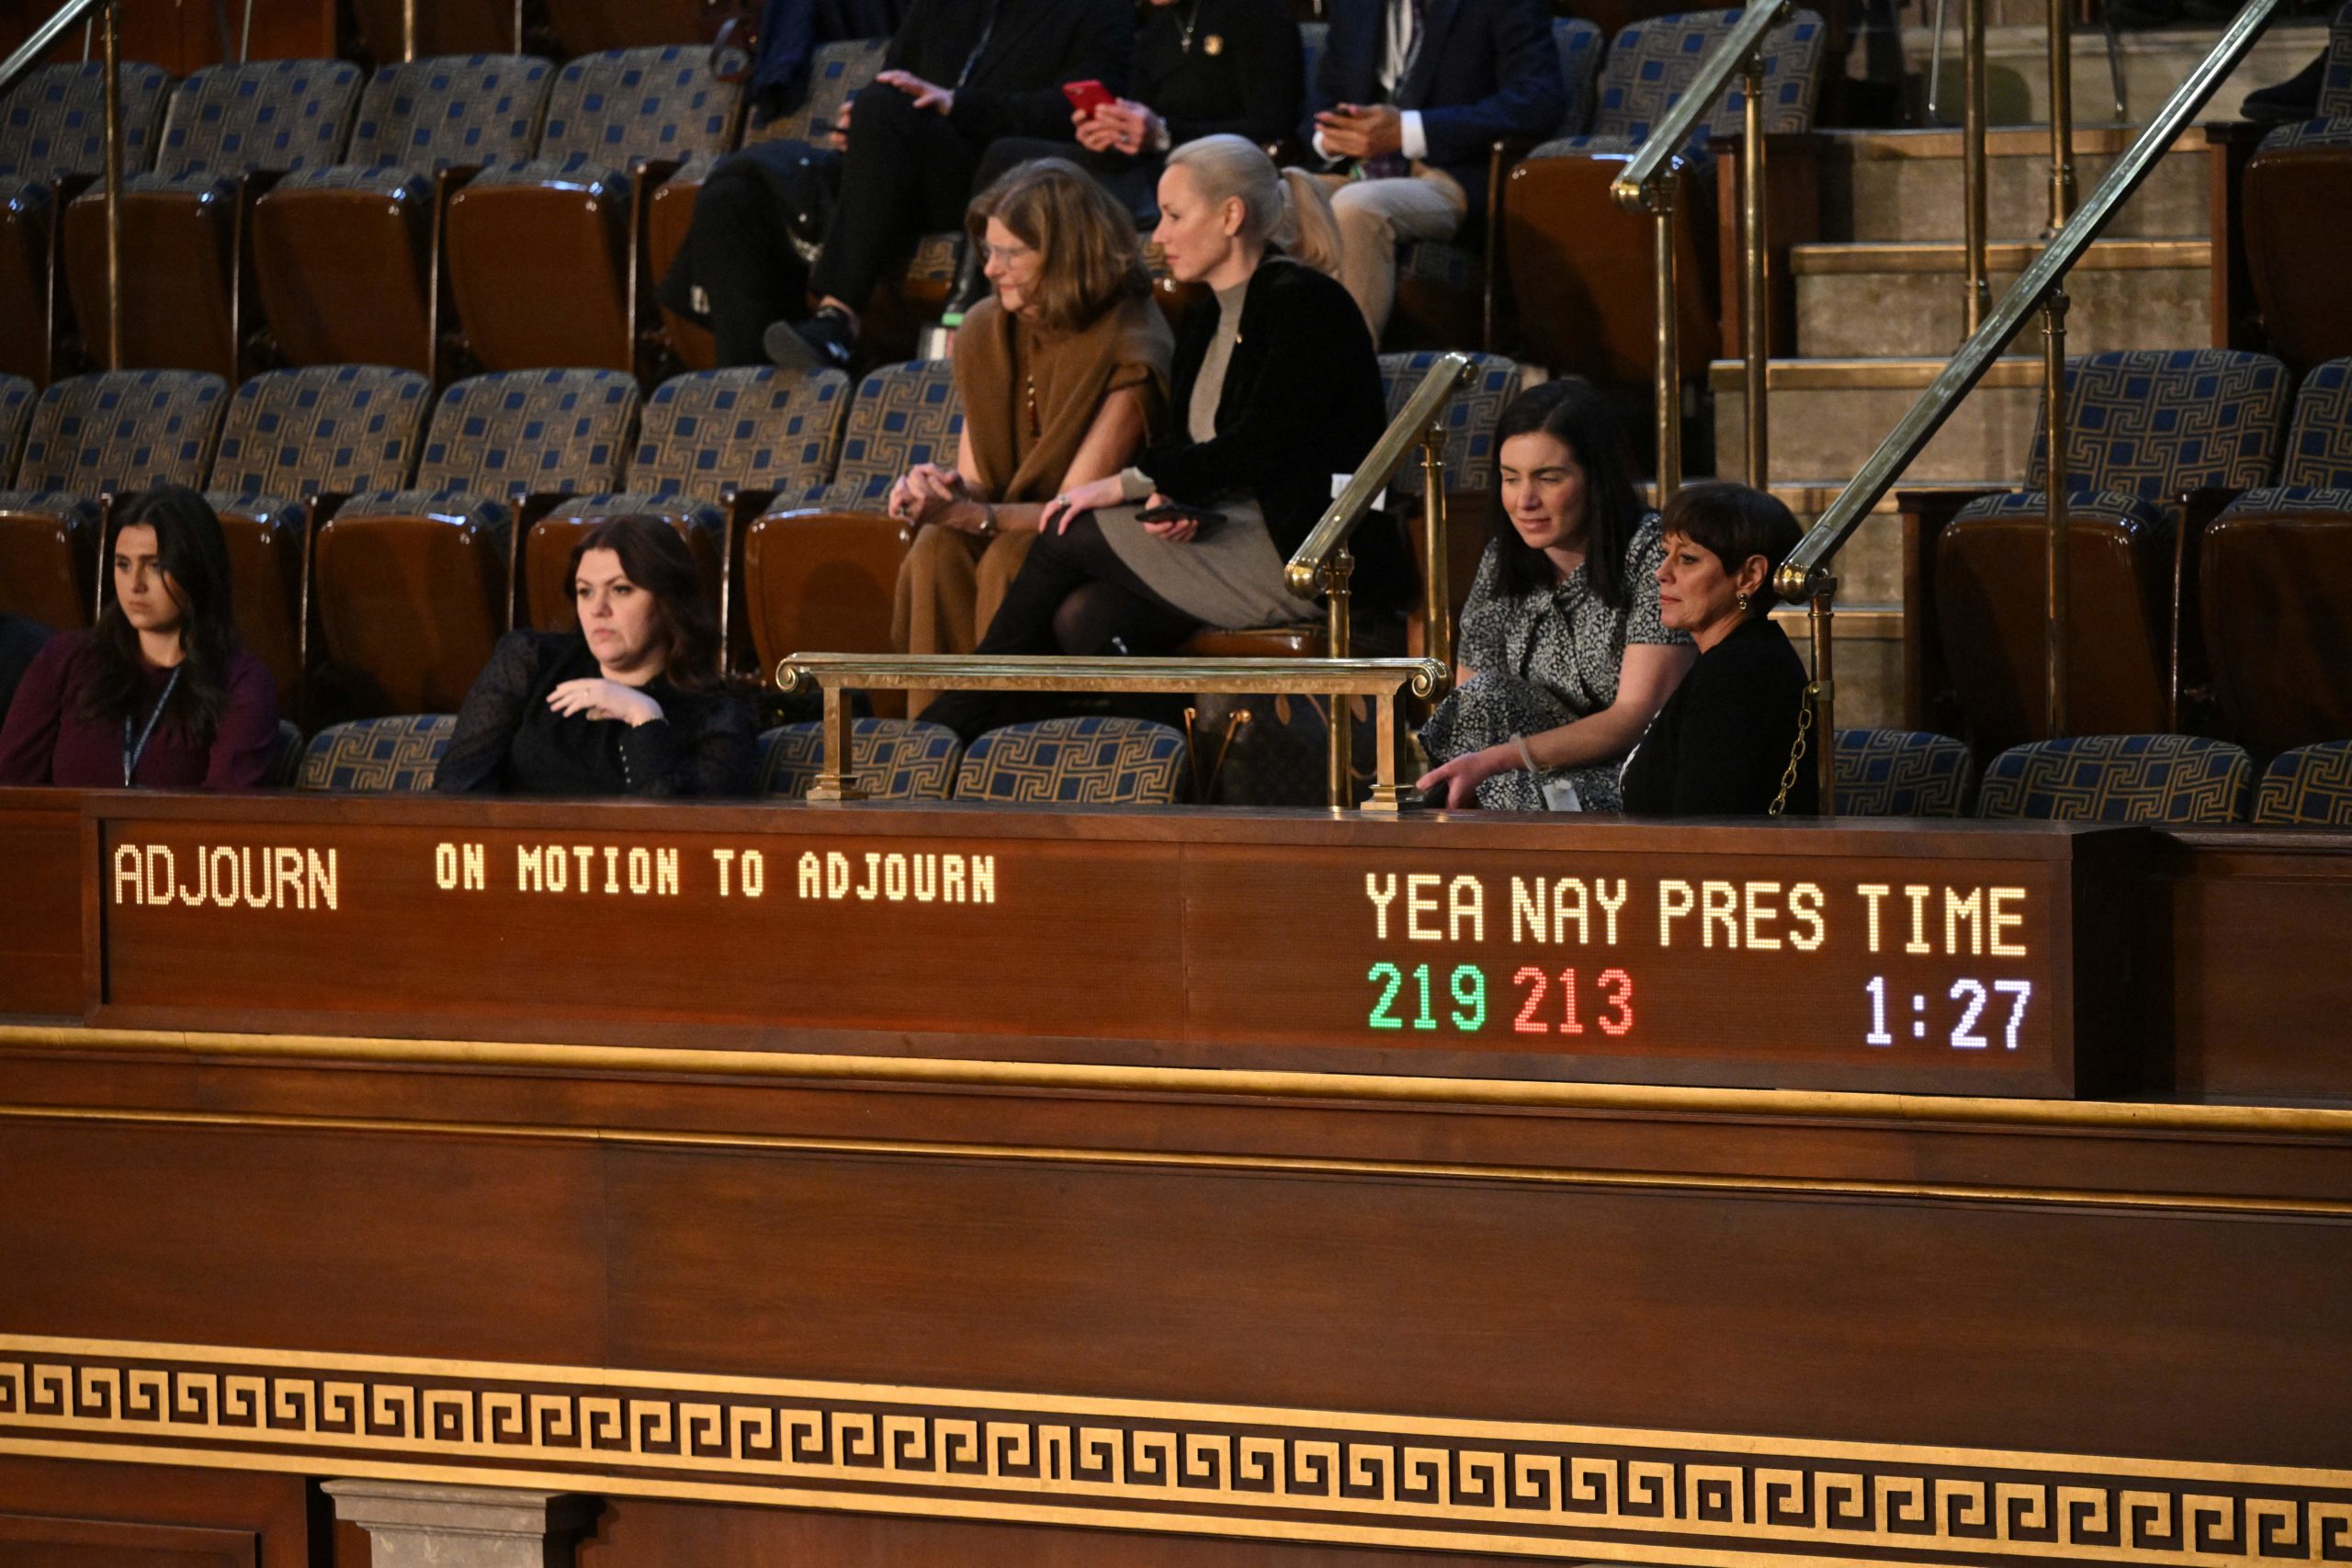 Onlookers watch as a board displays the vote count as members of the House of Representatives vote on a motion to adjourn, at the US Capitol in Washington, DC, on January 5, 2023. (Photo by MANDEL NGAN / AFP) (Photo by MANDEL NGAN/AFP via Getty Images)